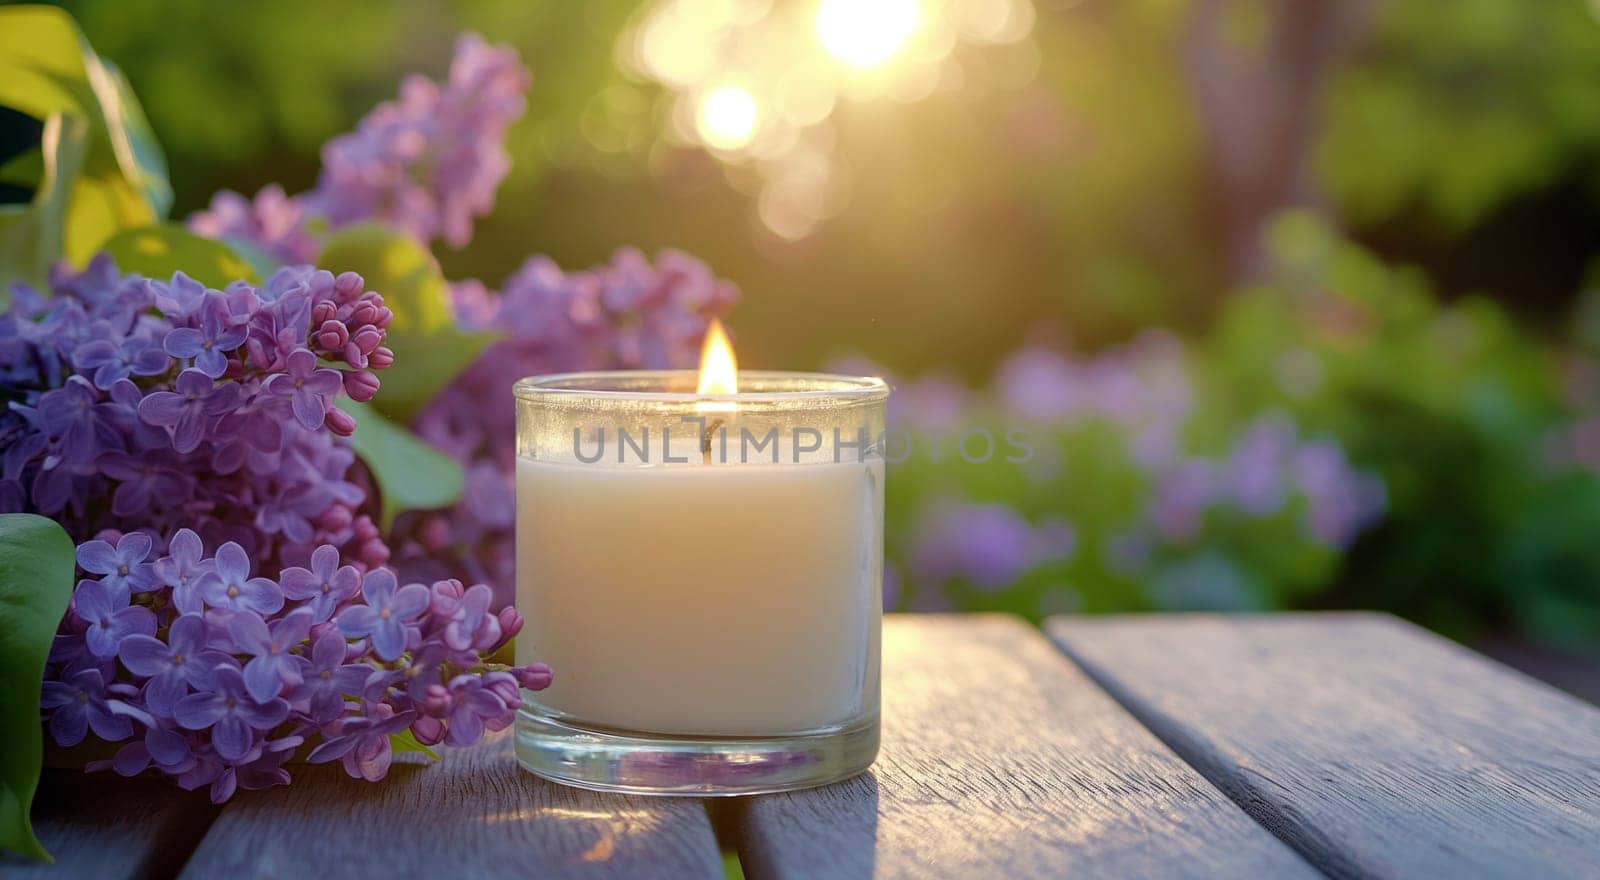 A tranquil scene with a lit candle beside fresh lilac blossoms on a wooden surface against a sunset backdrop. High quality photo